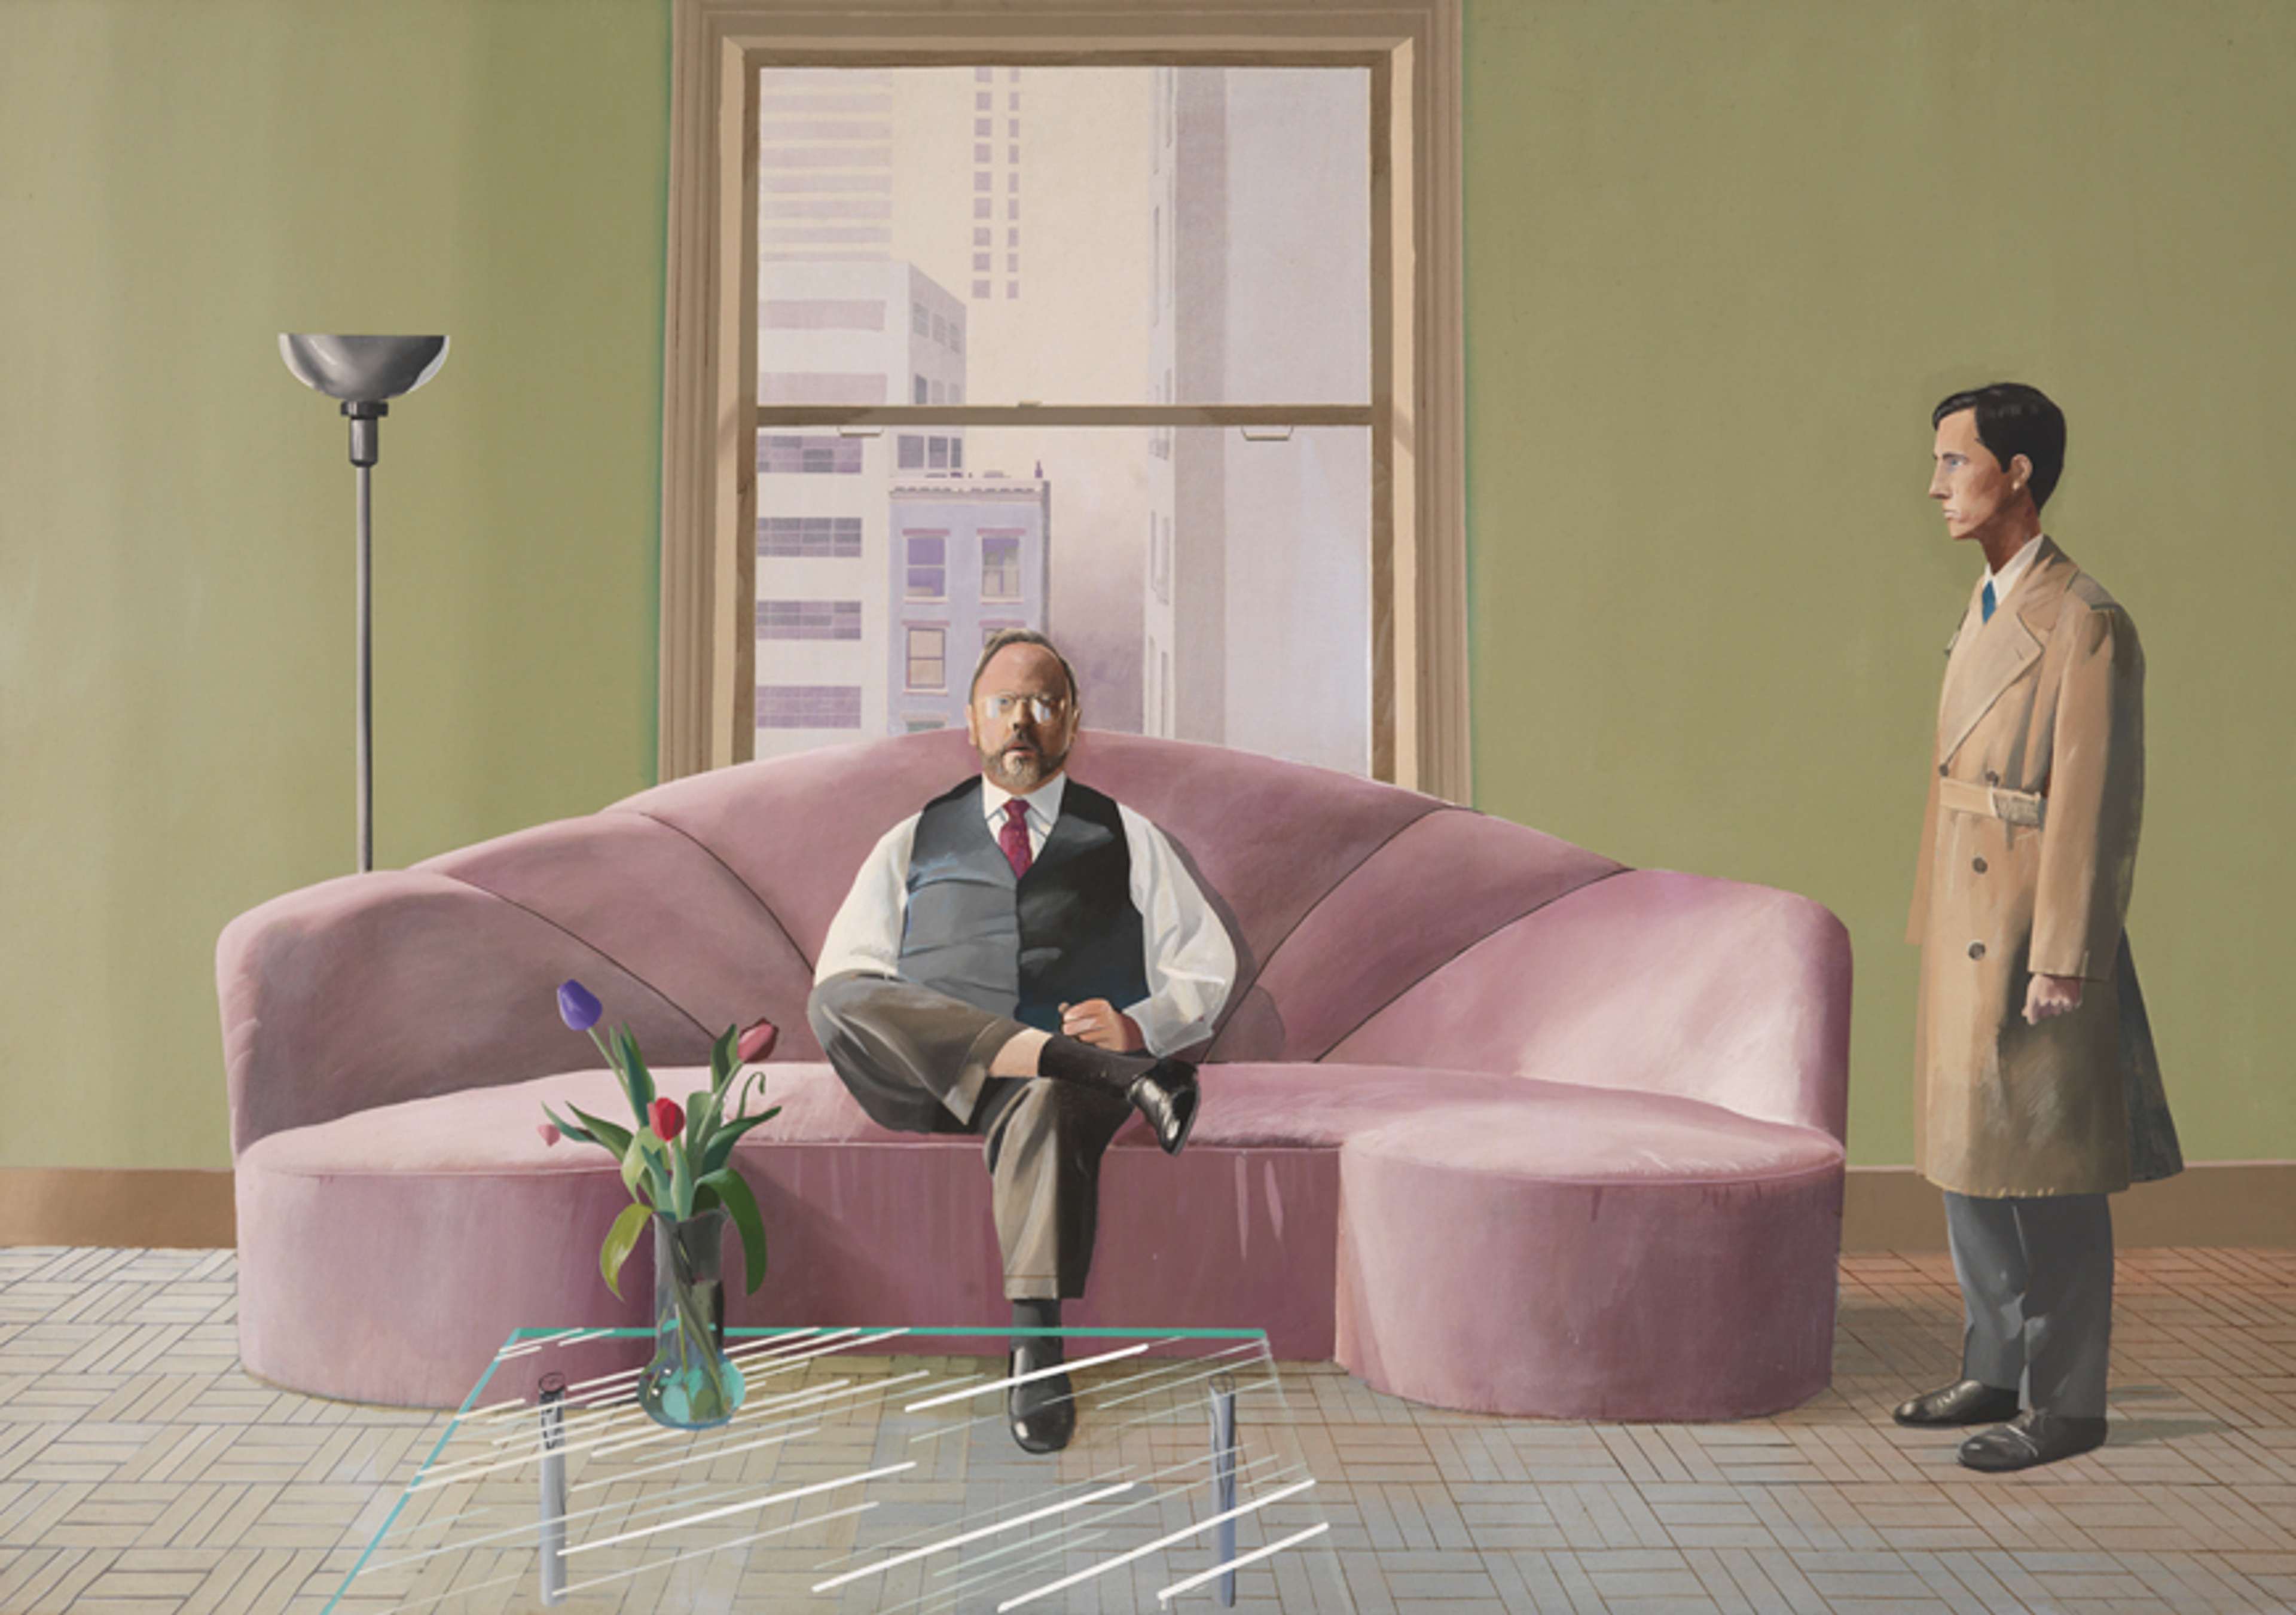 David Hockney’s Henry Geldzahler And Christopher Scott. An acrylic portrait of one man seated on a pink couch with another standing on the side of him.